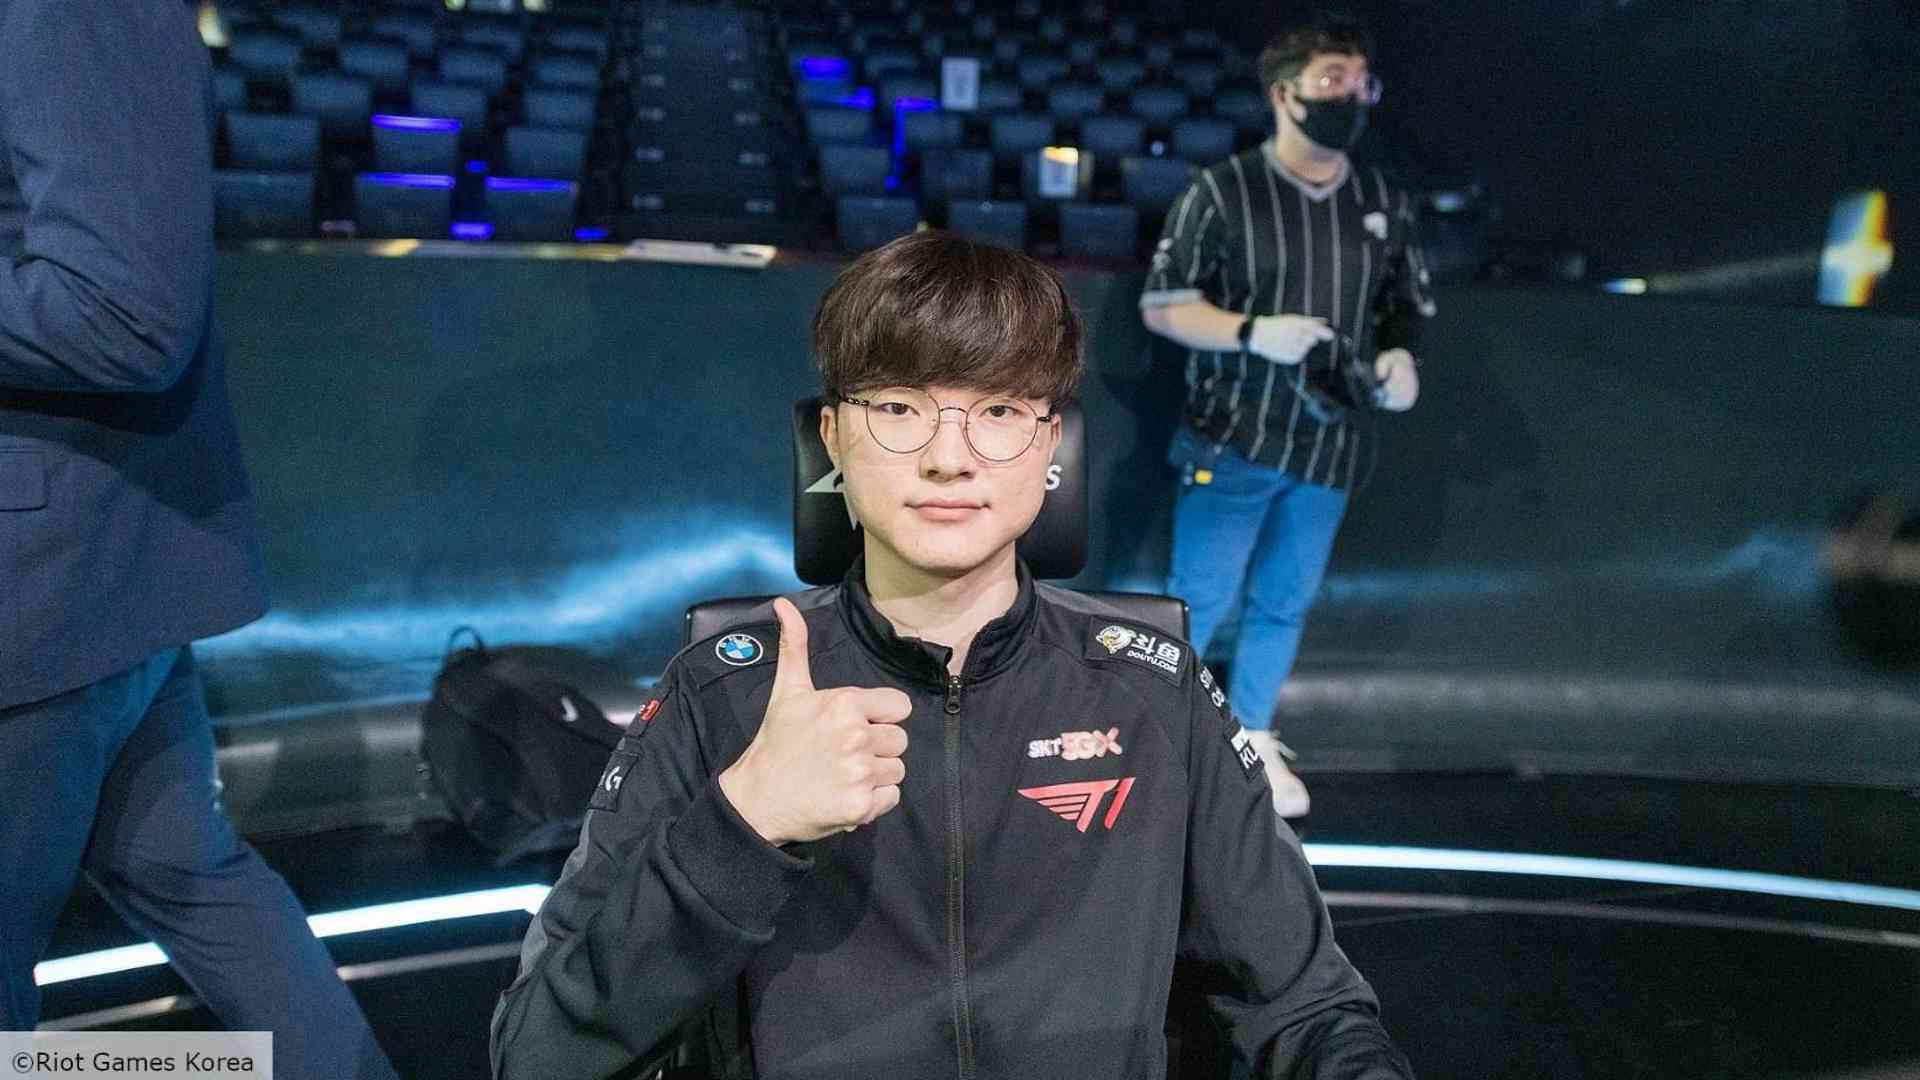 Faker wins Red Bull Esports Player Of The Year poll